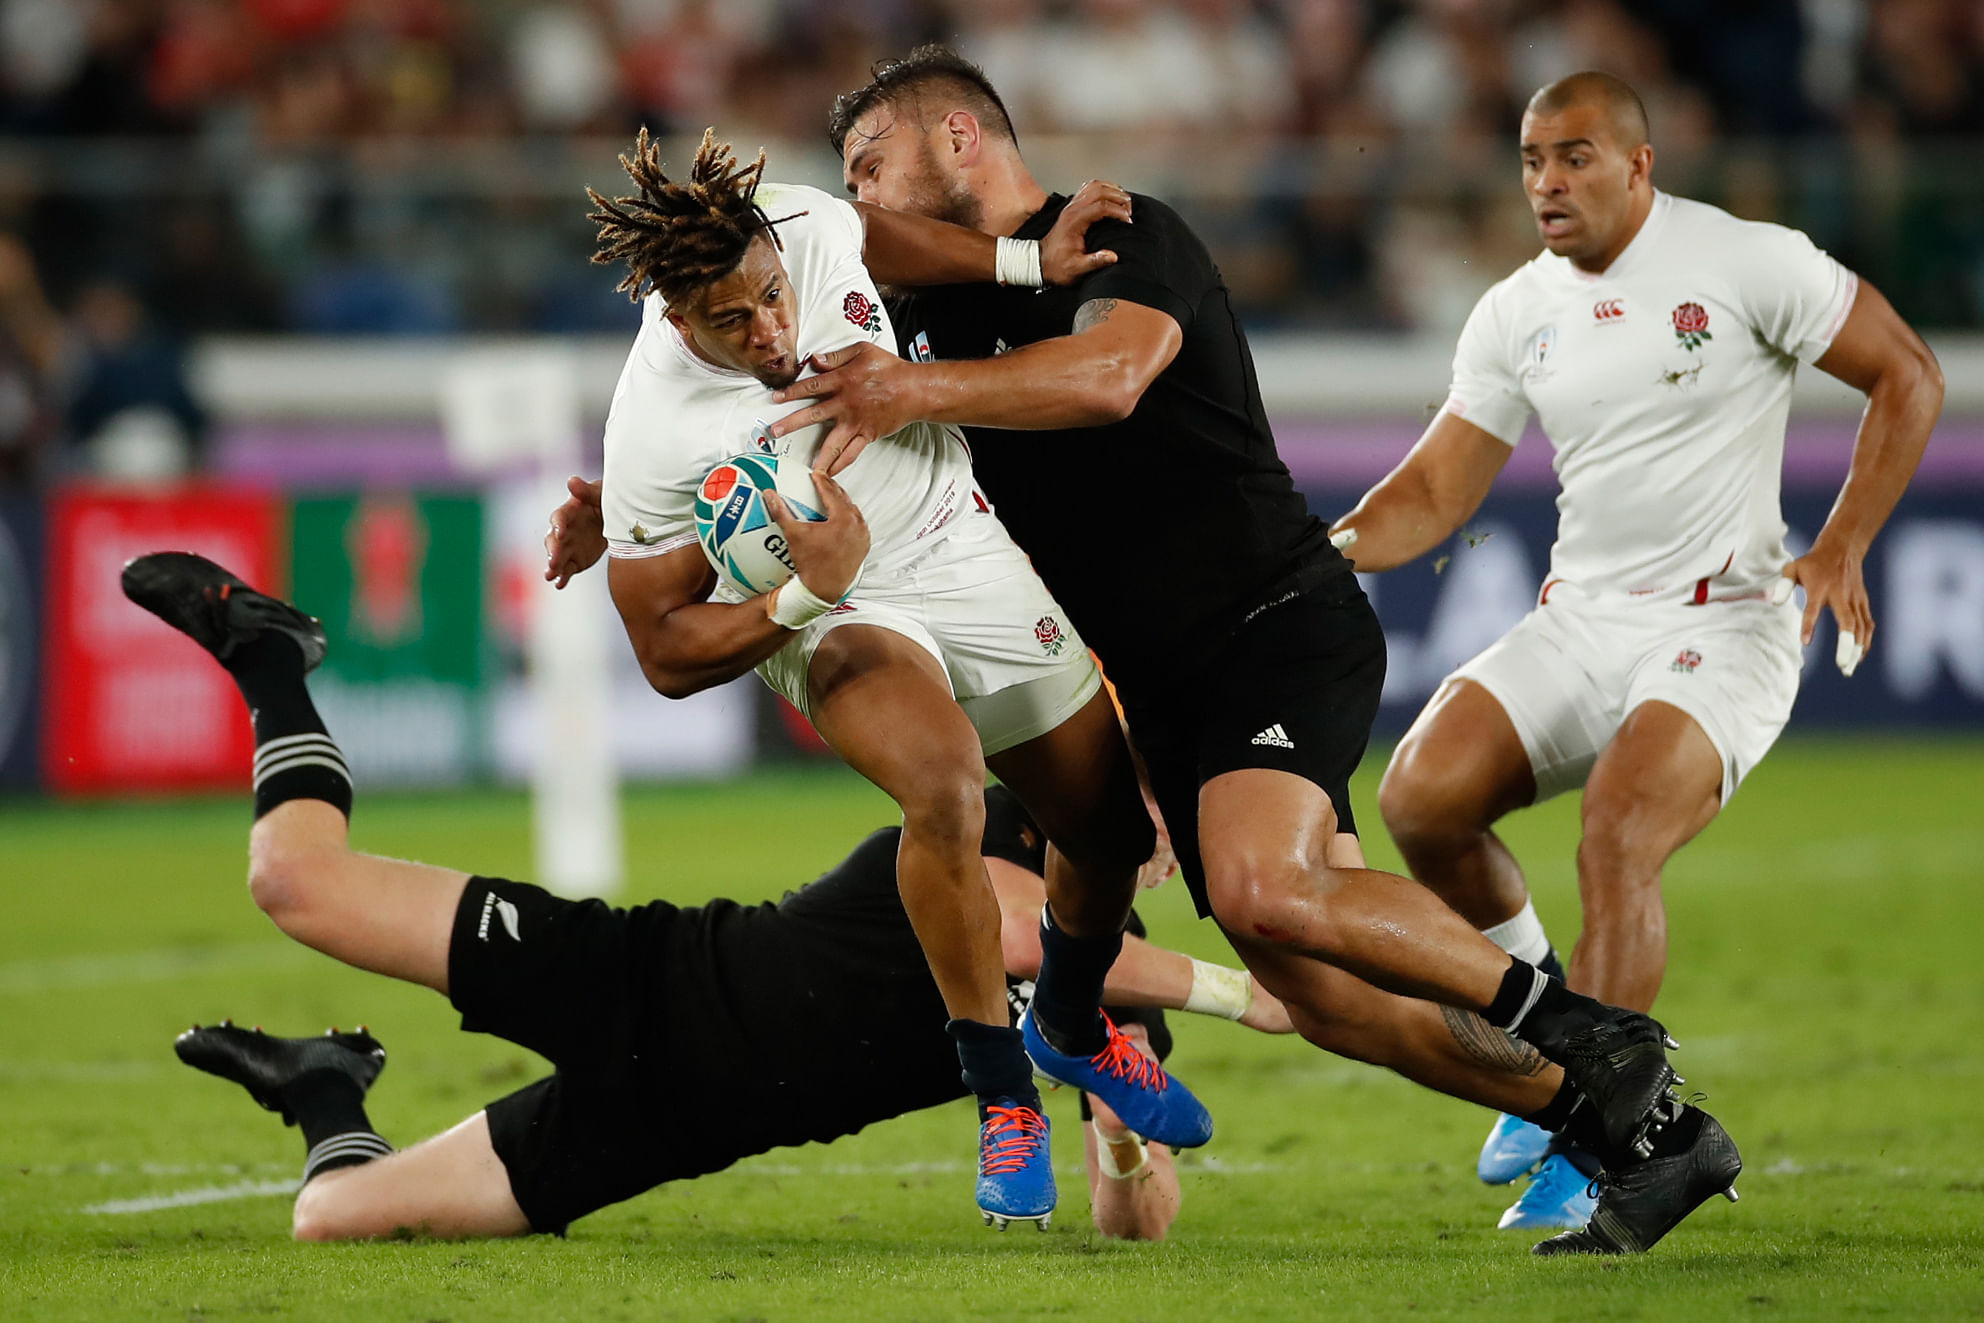 England's wing Anthony Watson (L) is tackled by New Zealand's prop Joe Moody during the Japan 2019 Rugby World Cup semi-final match between England and New Zealand. (AFP Photo)